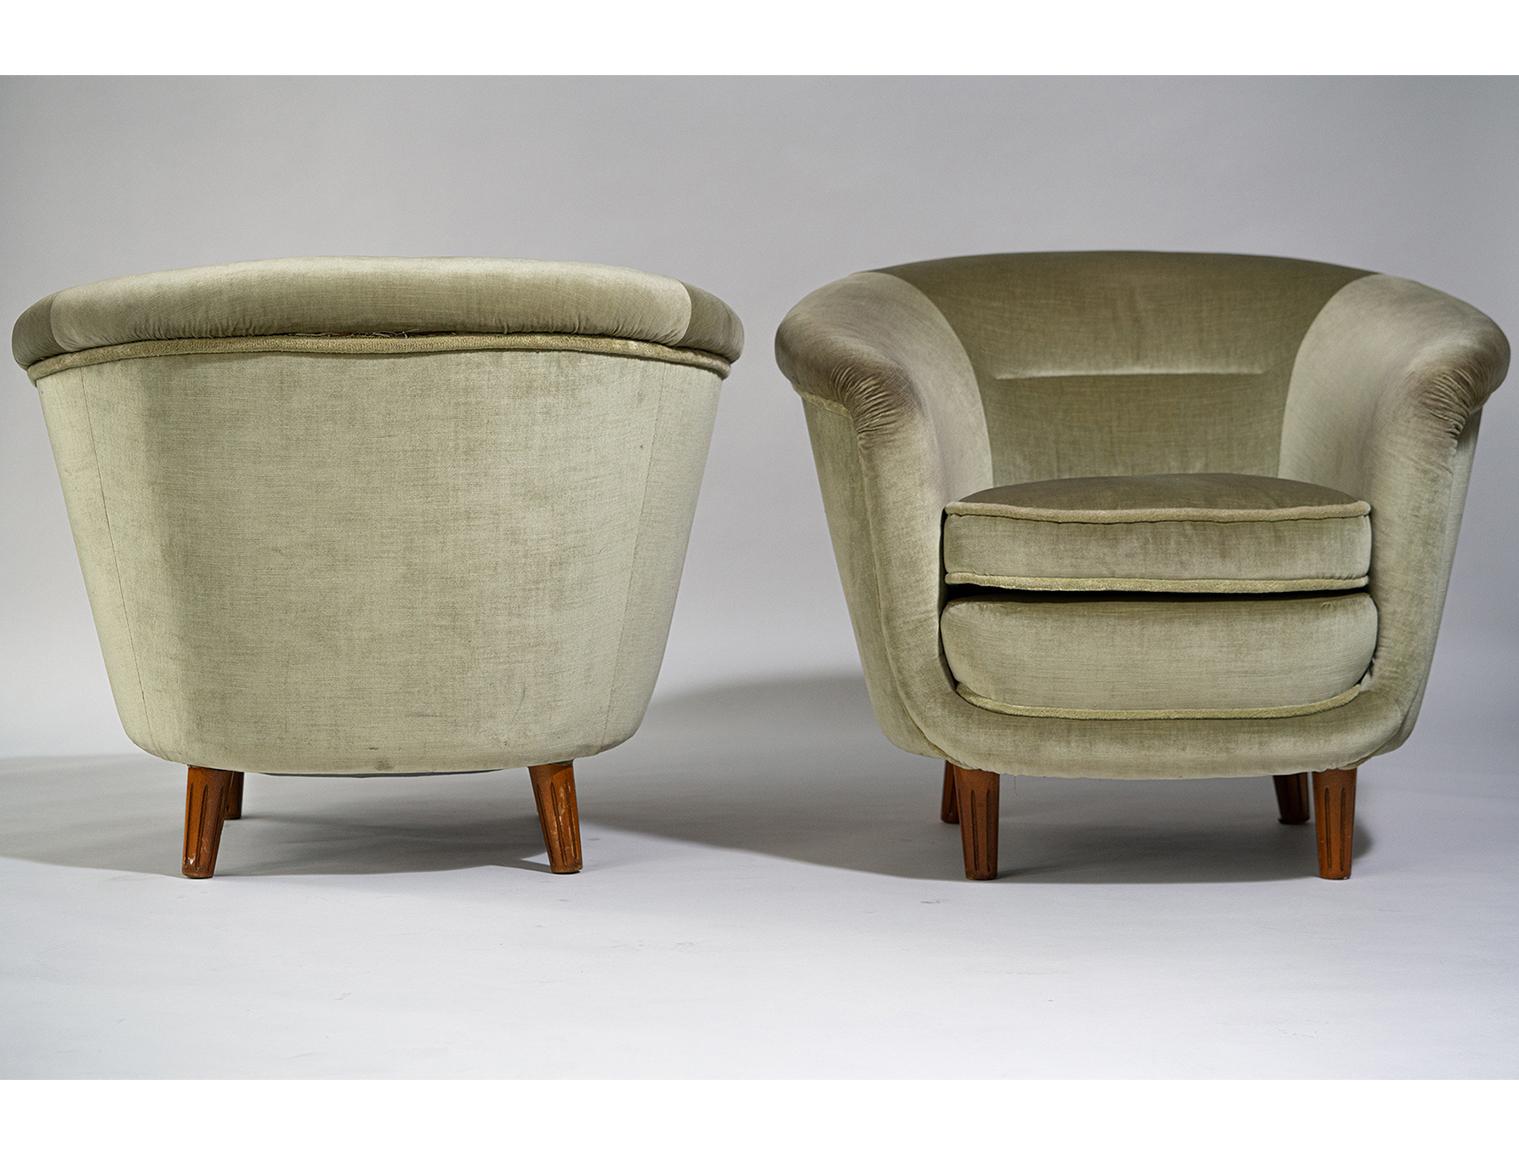 Tailored for a Lord. 
A Pair of Scandinavian or European club lounges from 1930/40s. Purchased in Sweden, possibly from a giant mansion, consider the unconventional large size. The original sage green mohair is in good condition, with some wear and